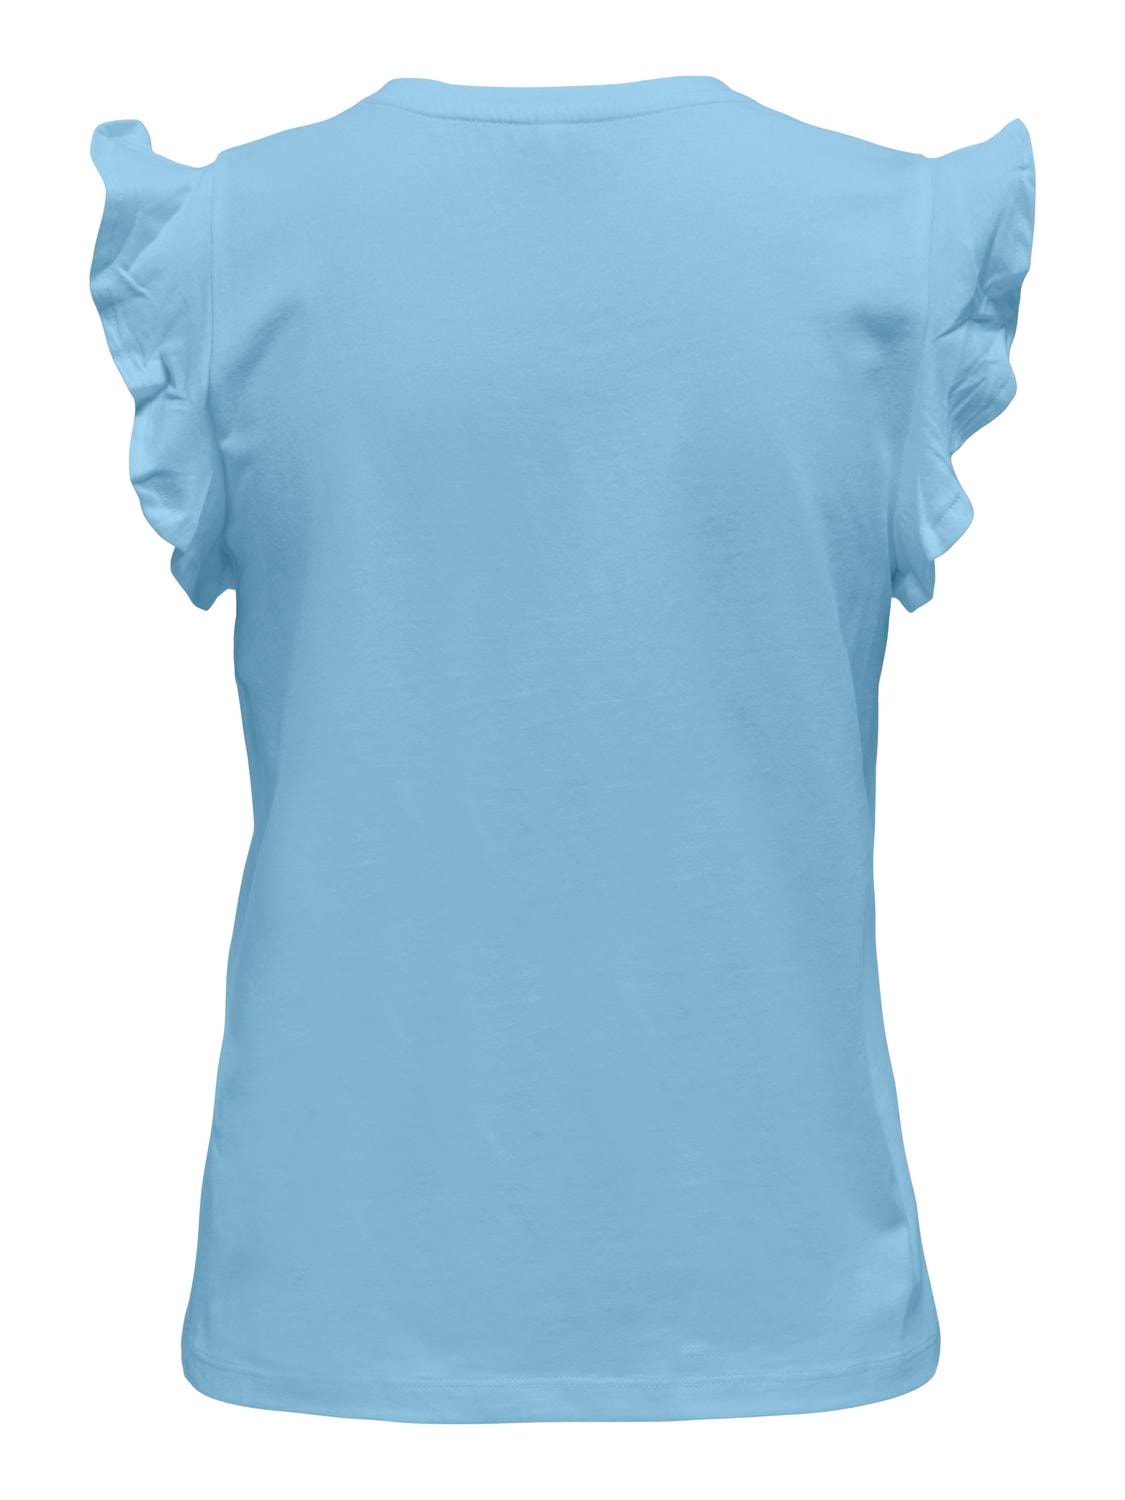 ONLY V-neck Ruffle Top -Clear Sky - 15252469